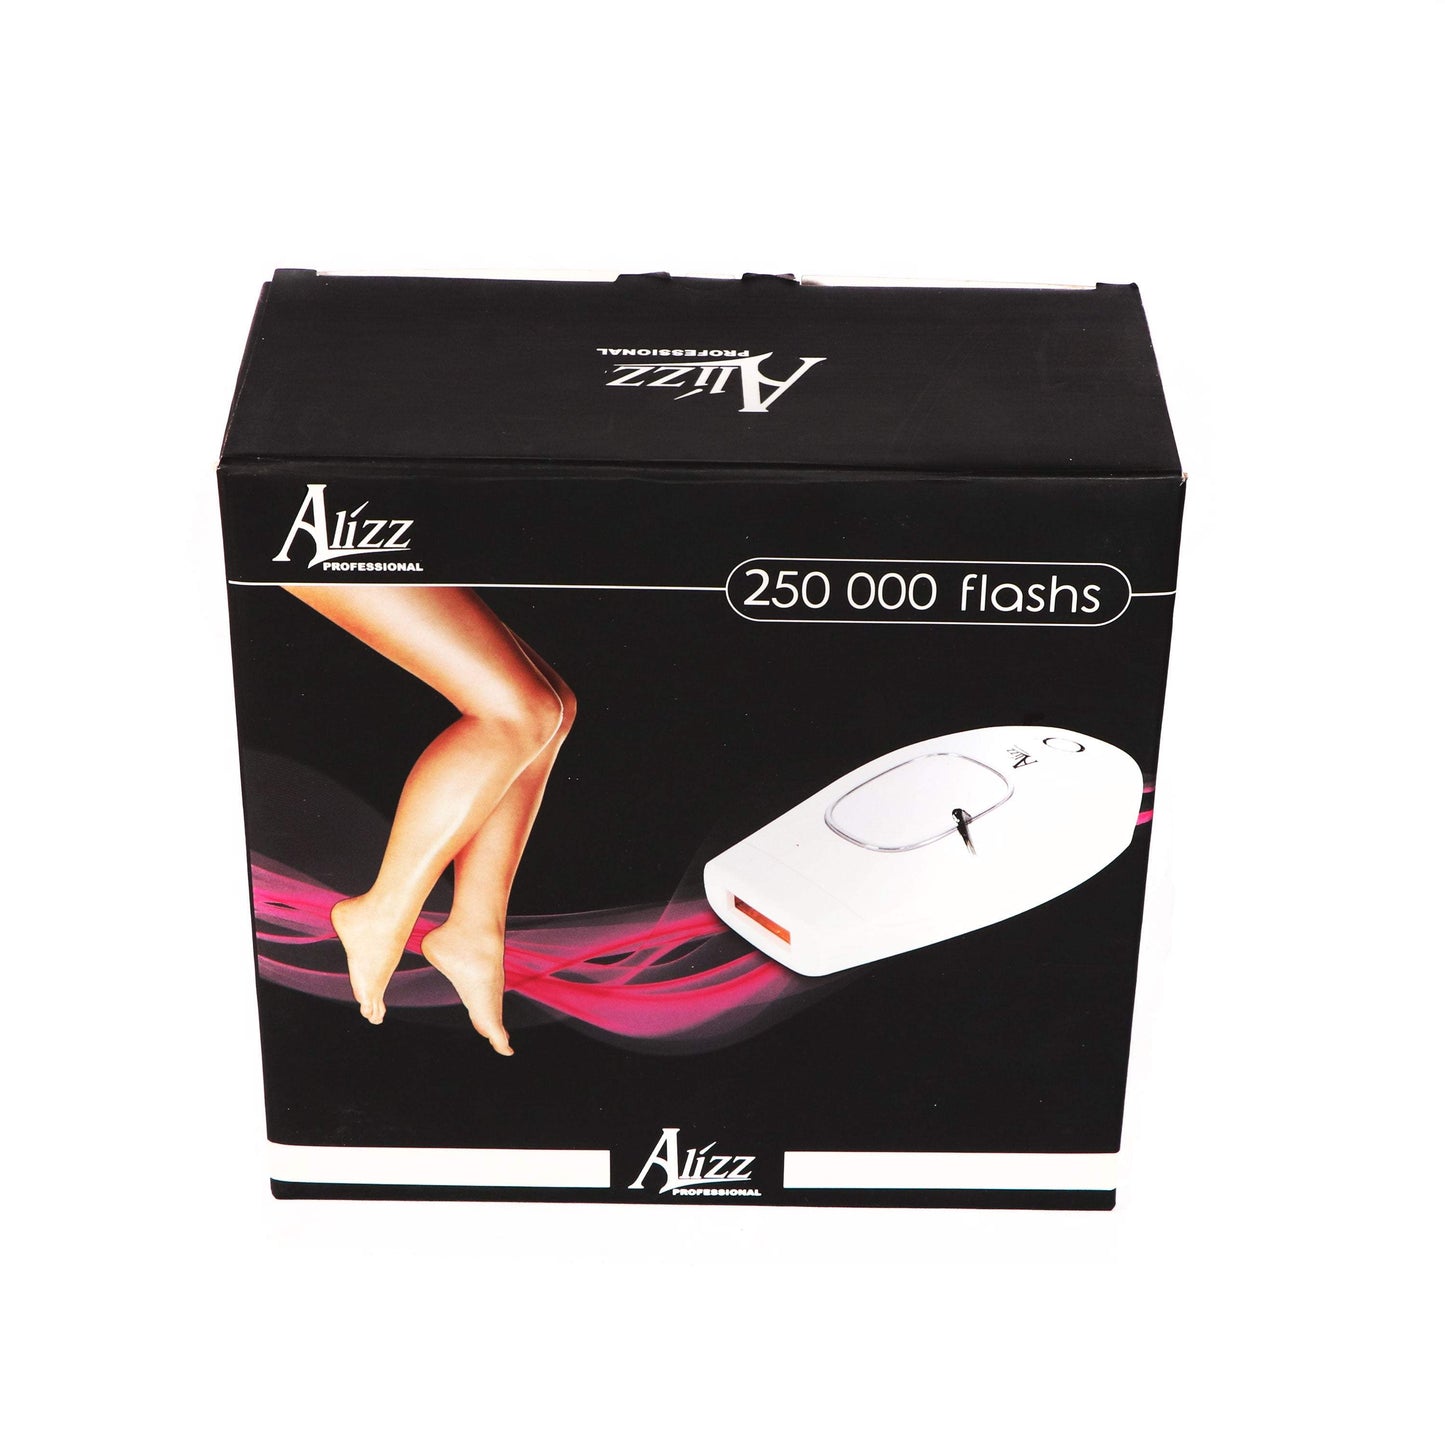 Alizz Professional 250000 Intense Pulsed Light Laser hair removal device-Royal Brands Co-